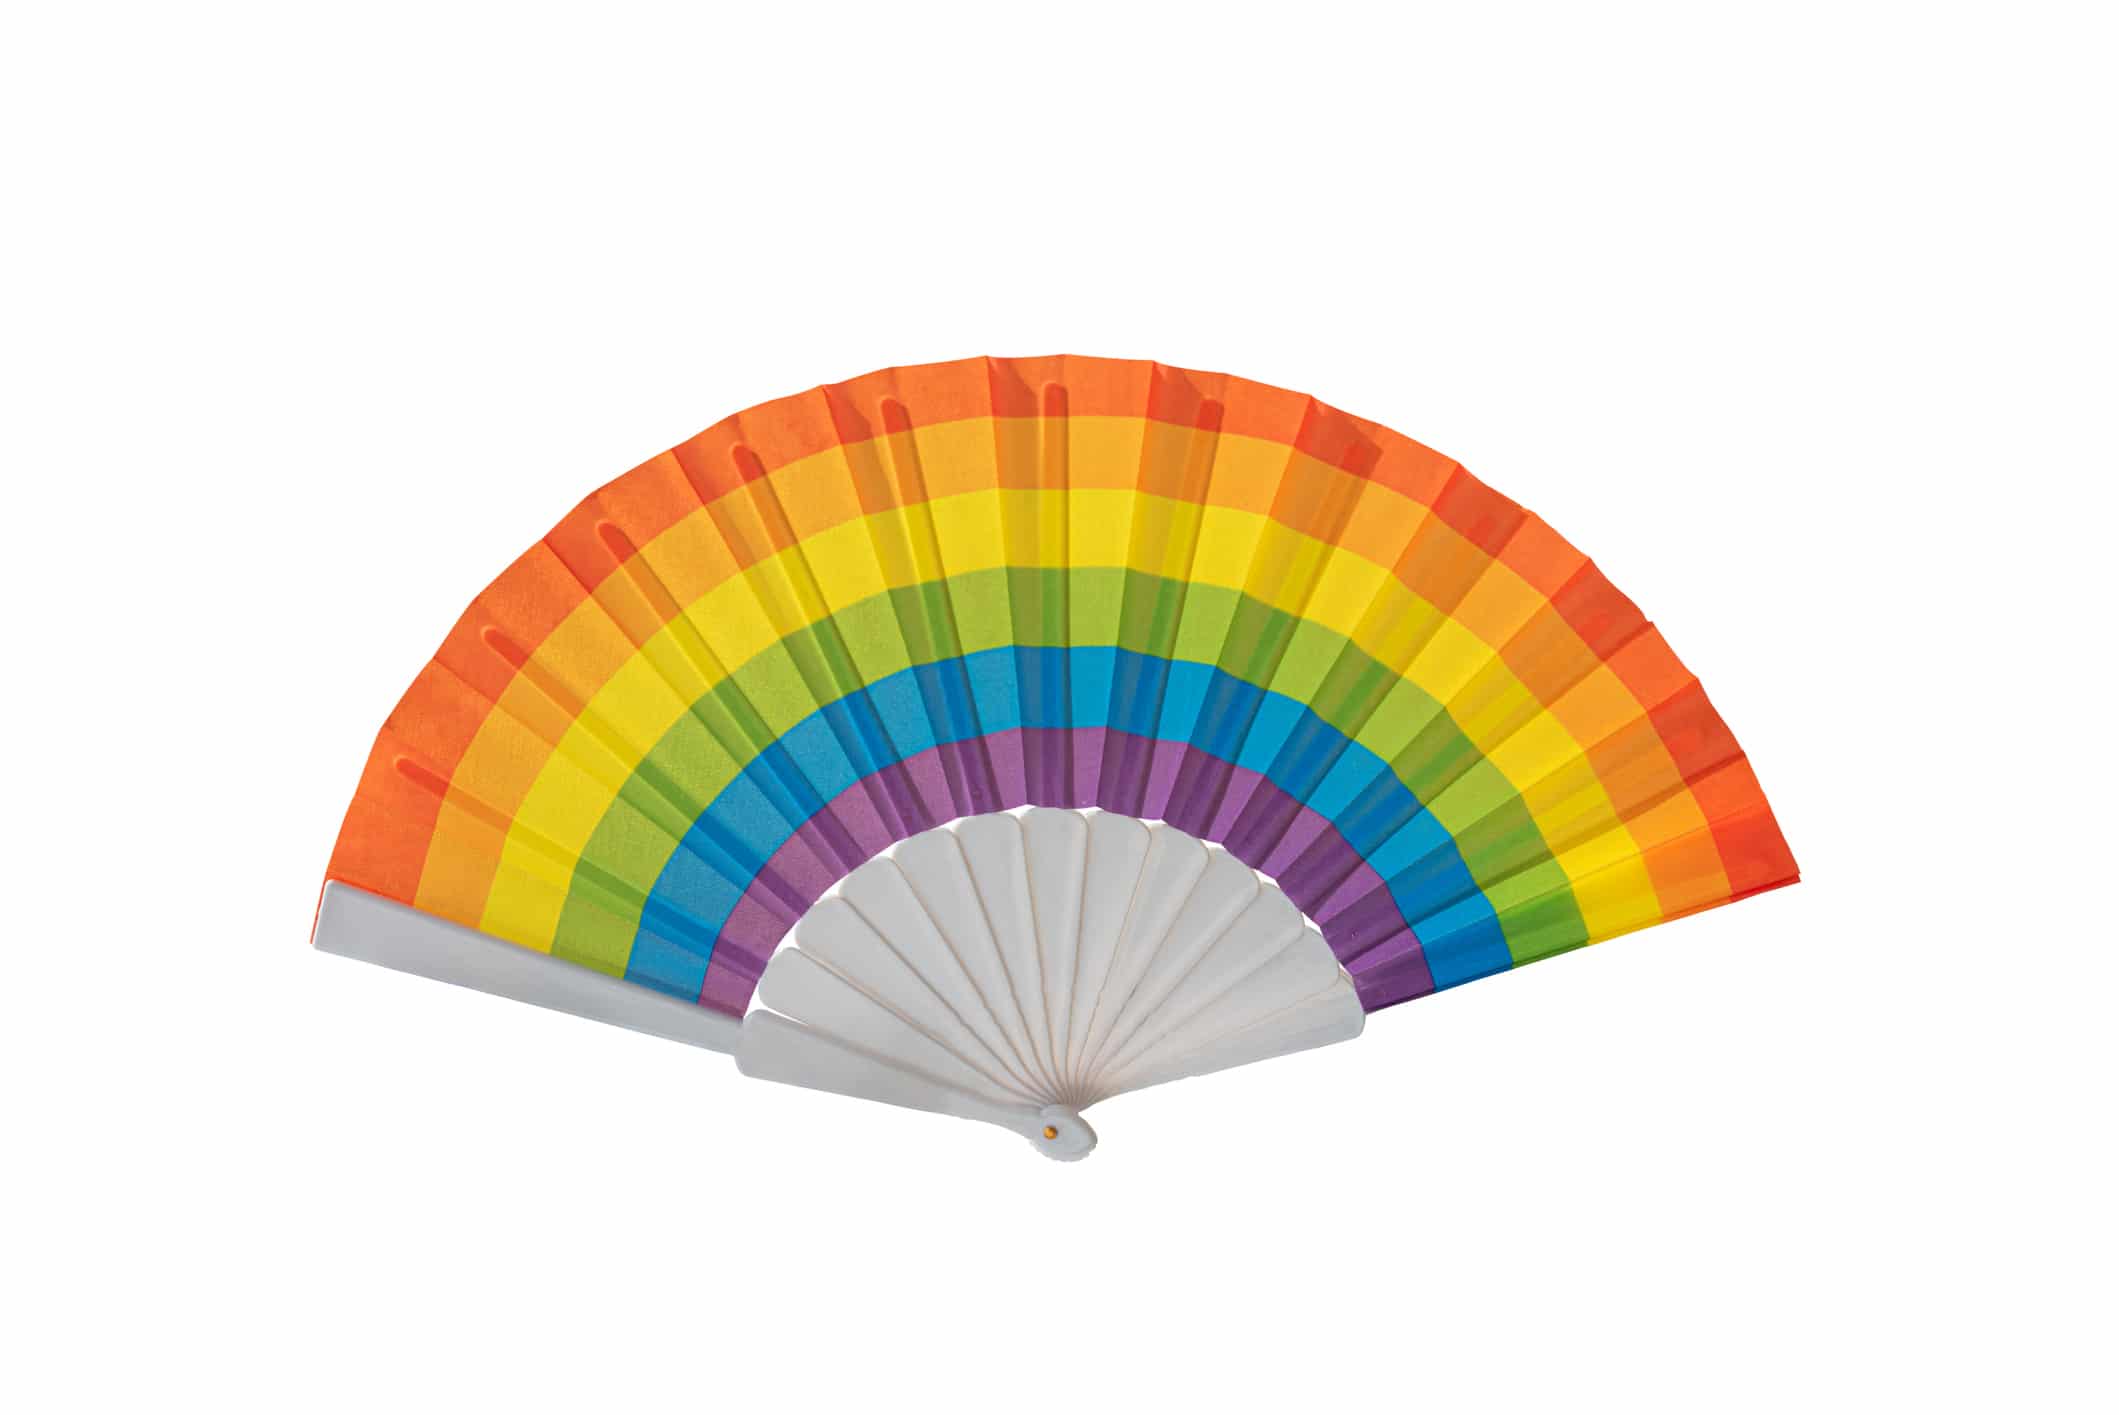 Fan with gay pride colors on a white background